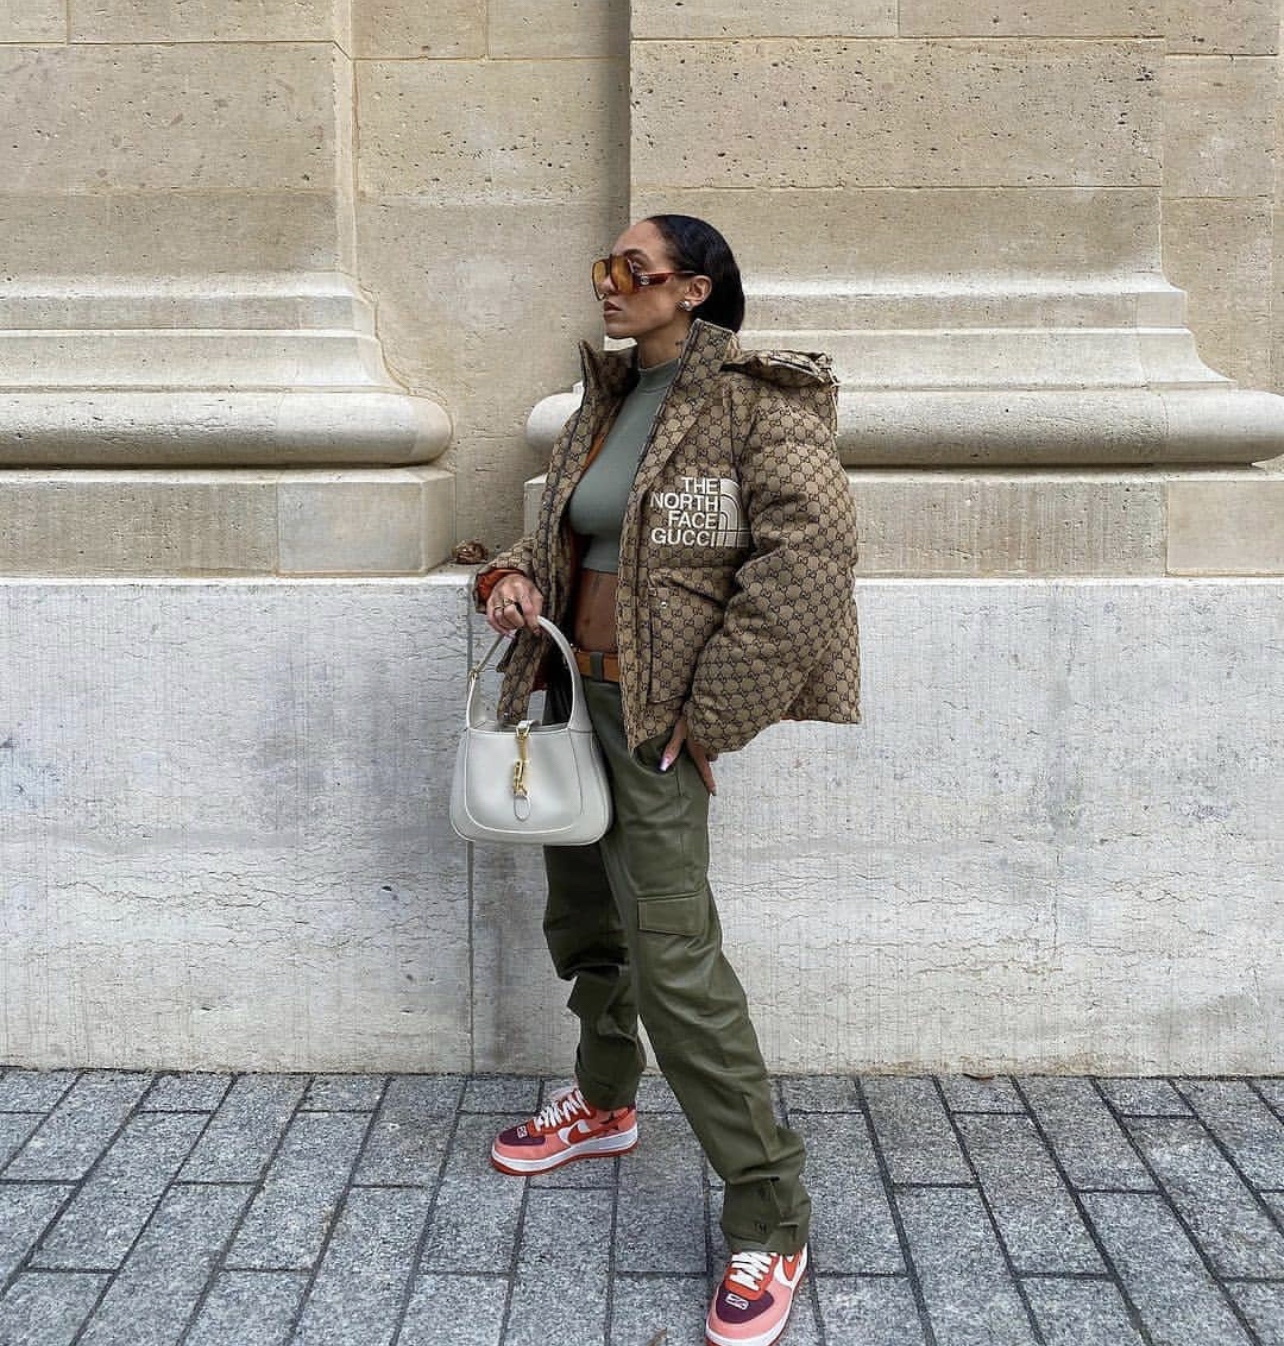 The North Face x Gucci Collection is Going to Take Over Street Style - Dope  Fashion Sense